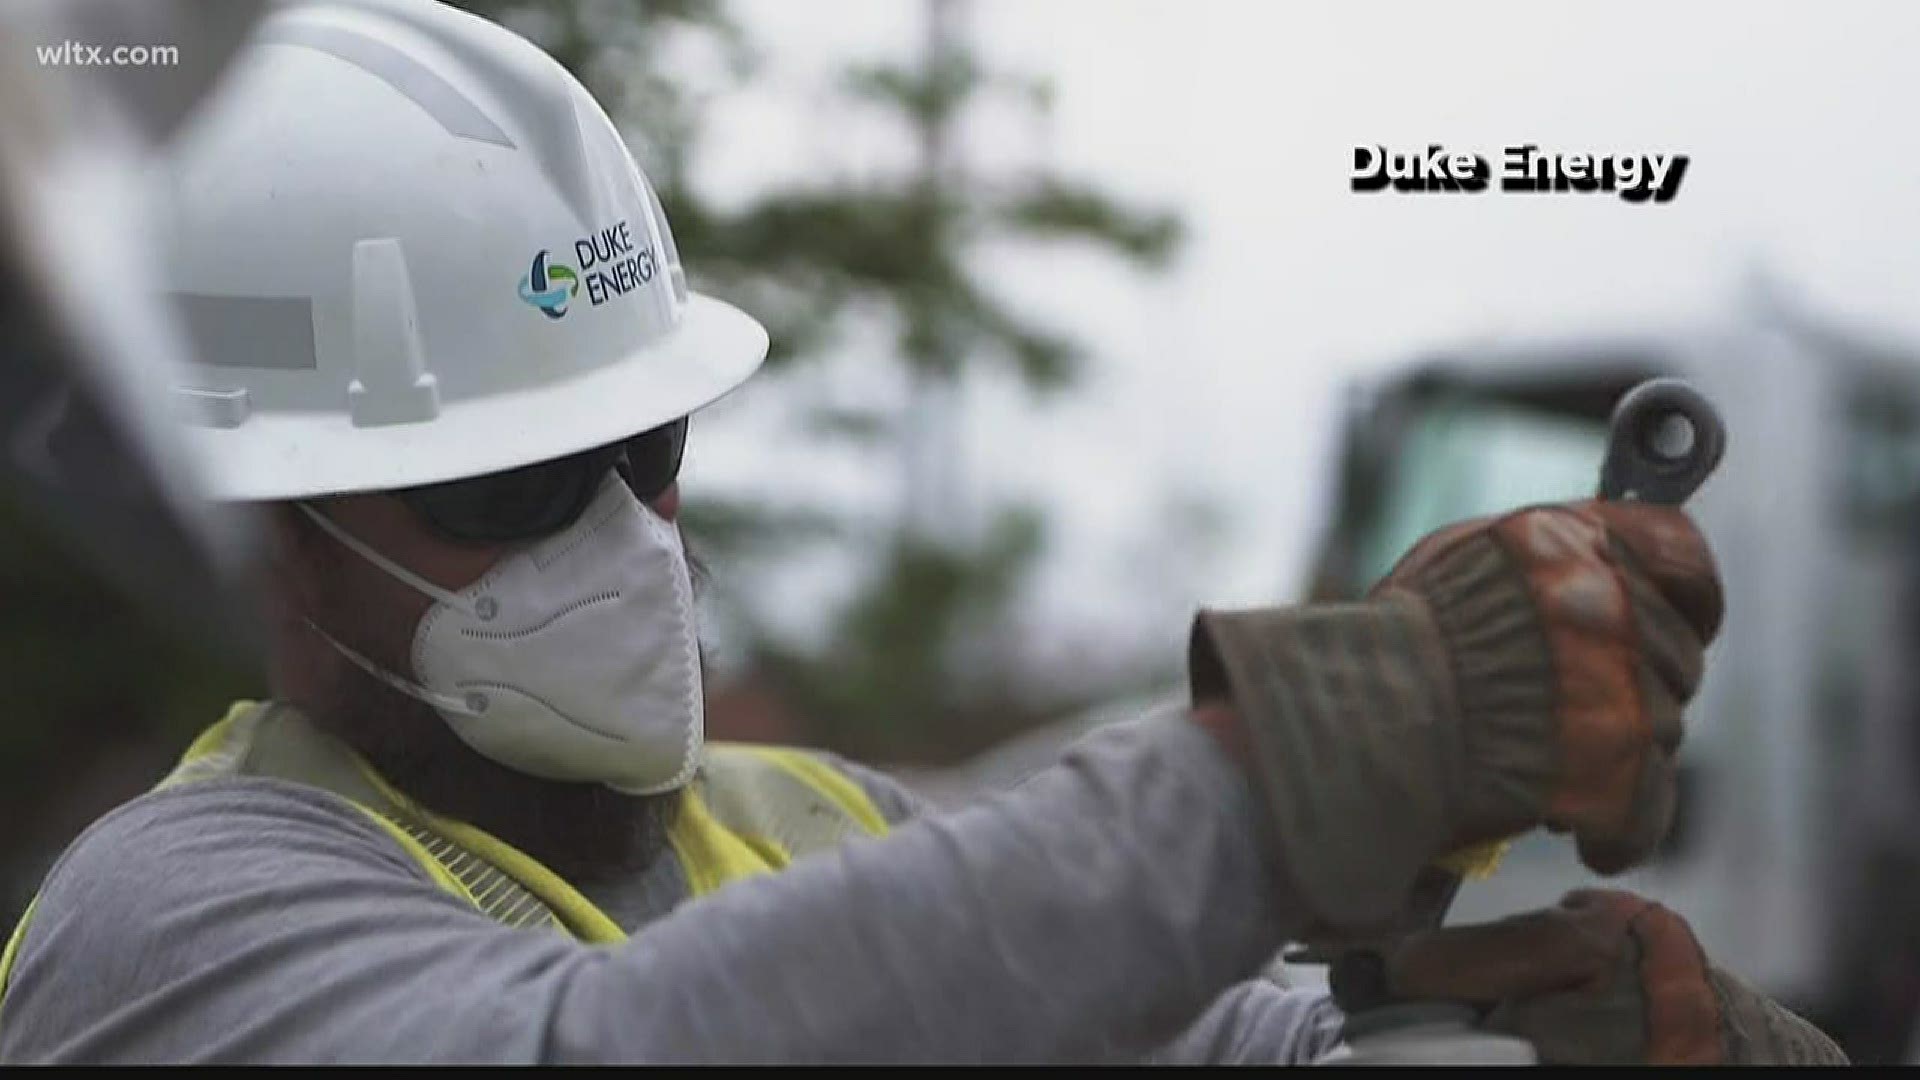 With the hurricane on the Palmetto State coast, crews from South Carolina and other parts of the country have come to help in case of power outages.